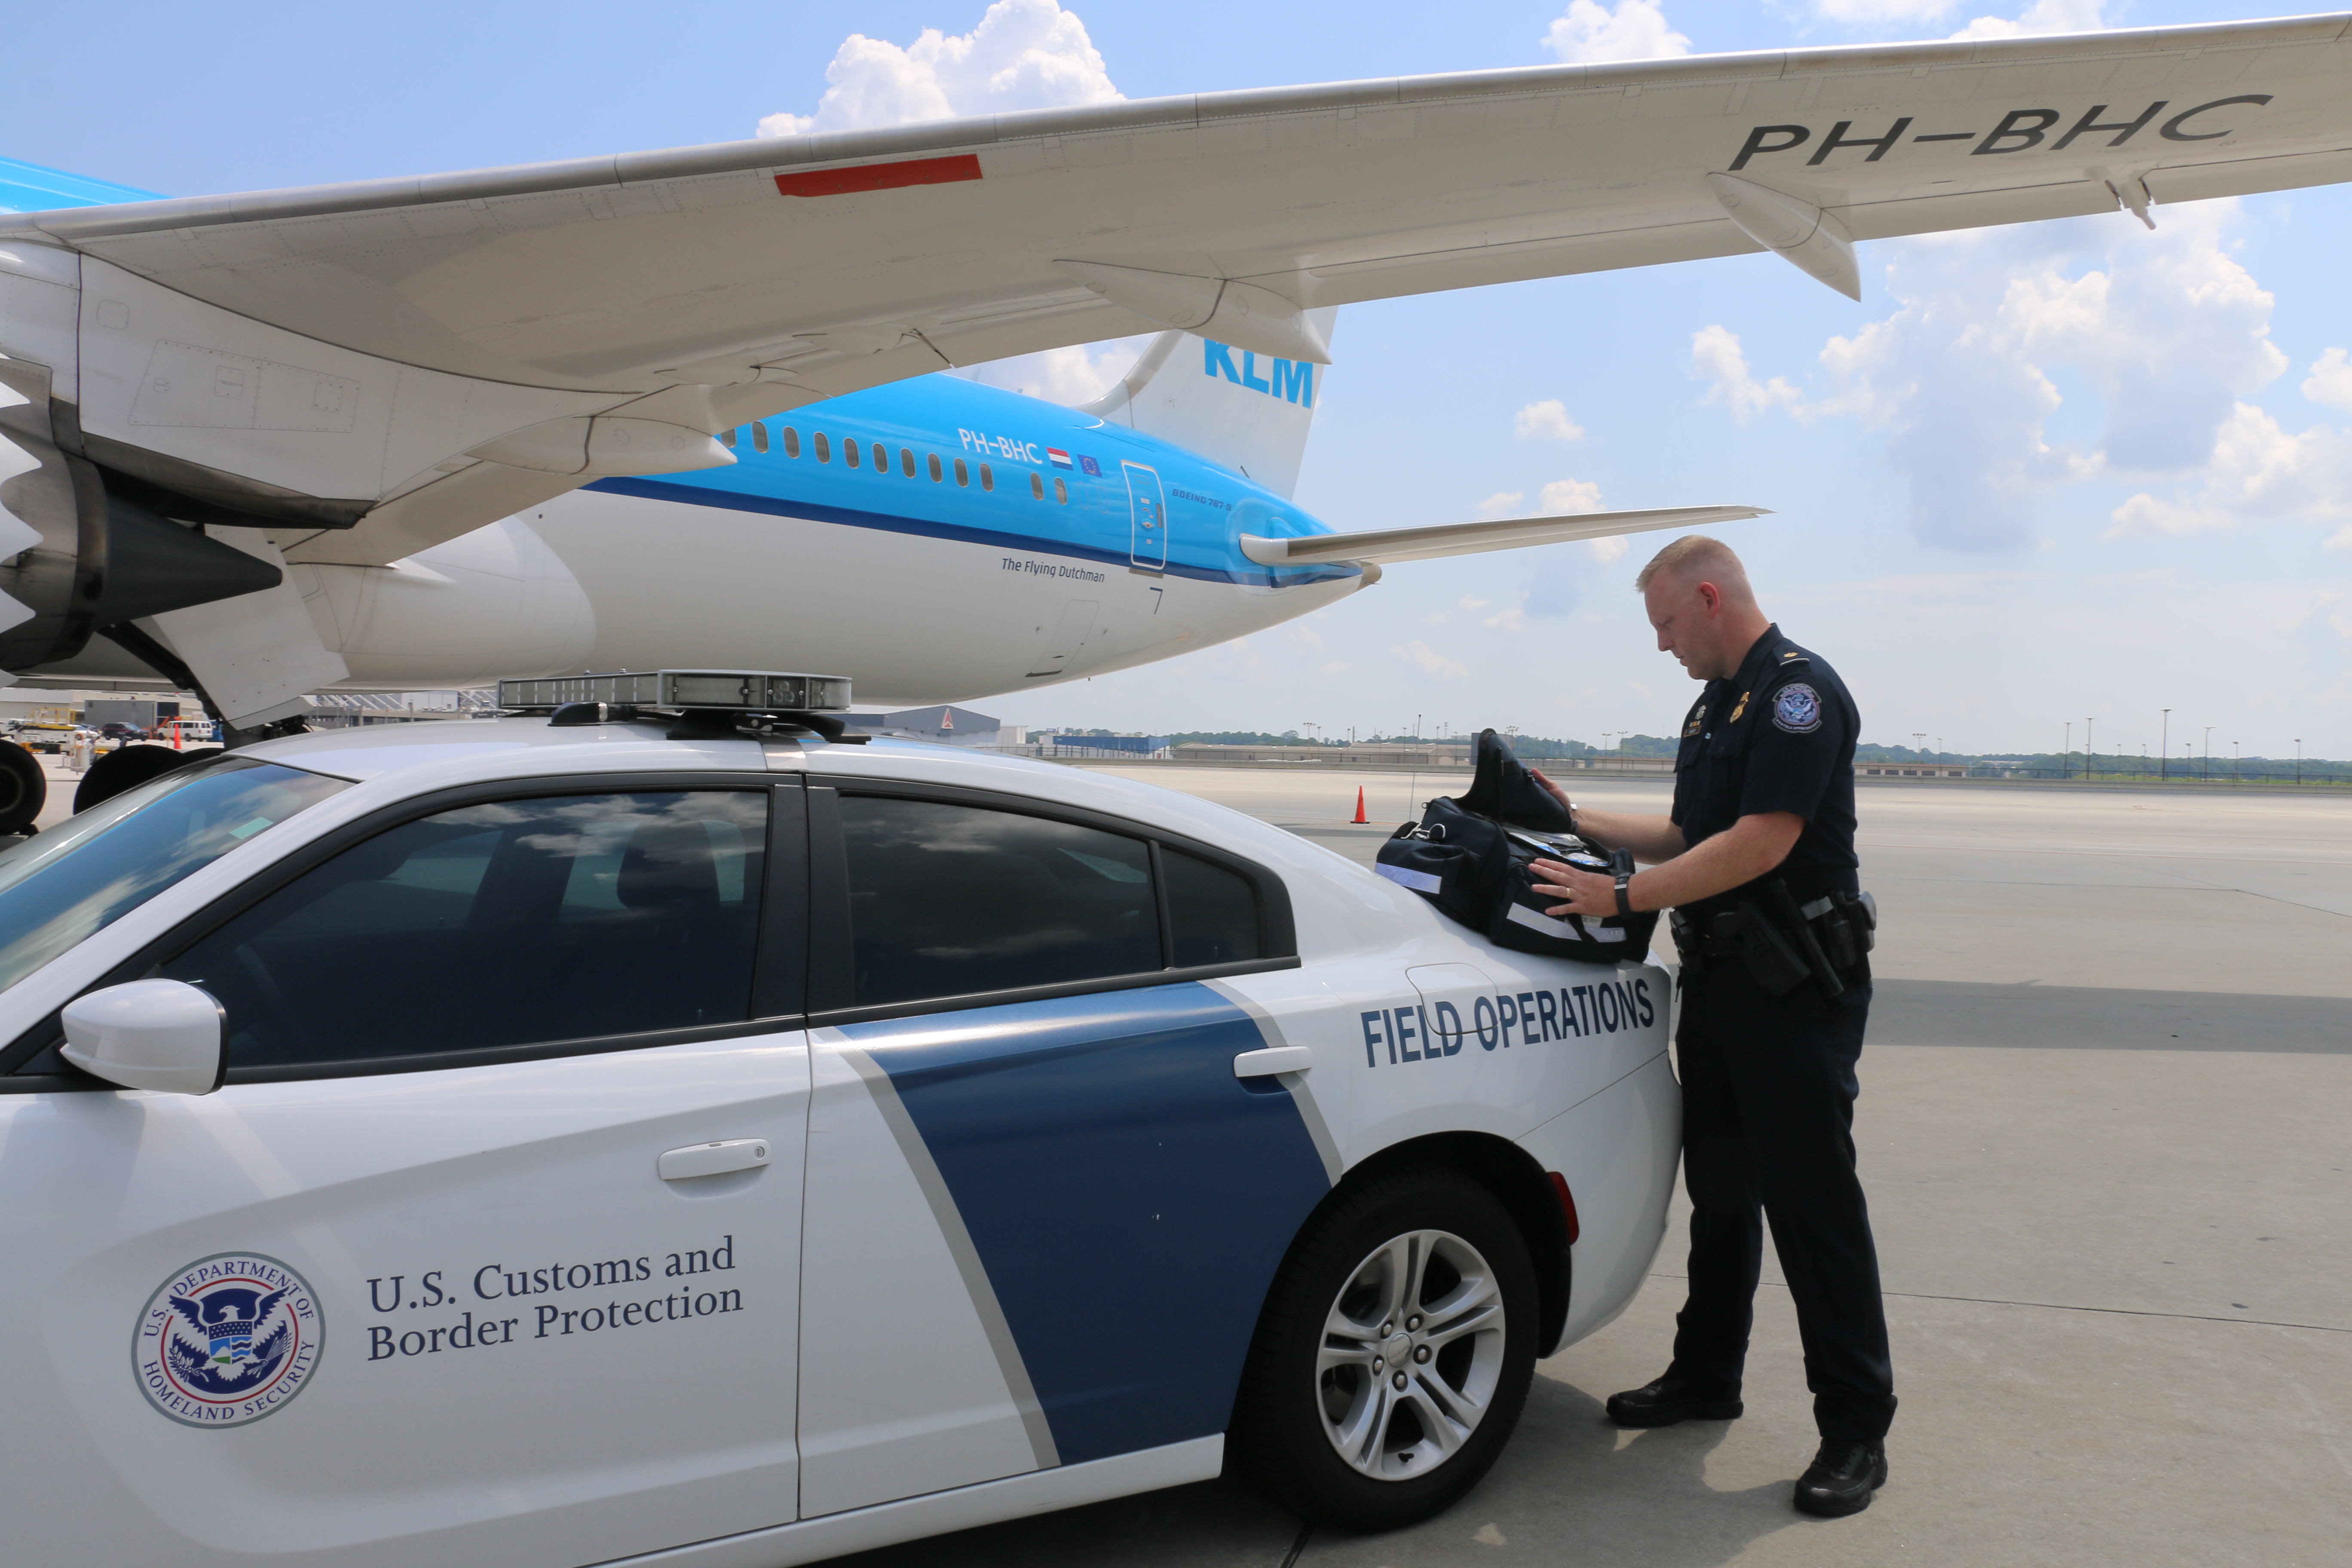 CBP officer in front of CBP vehicle and aircraft on tarmac at Atlanta.